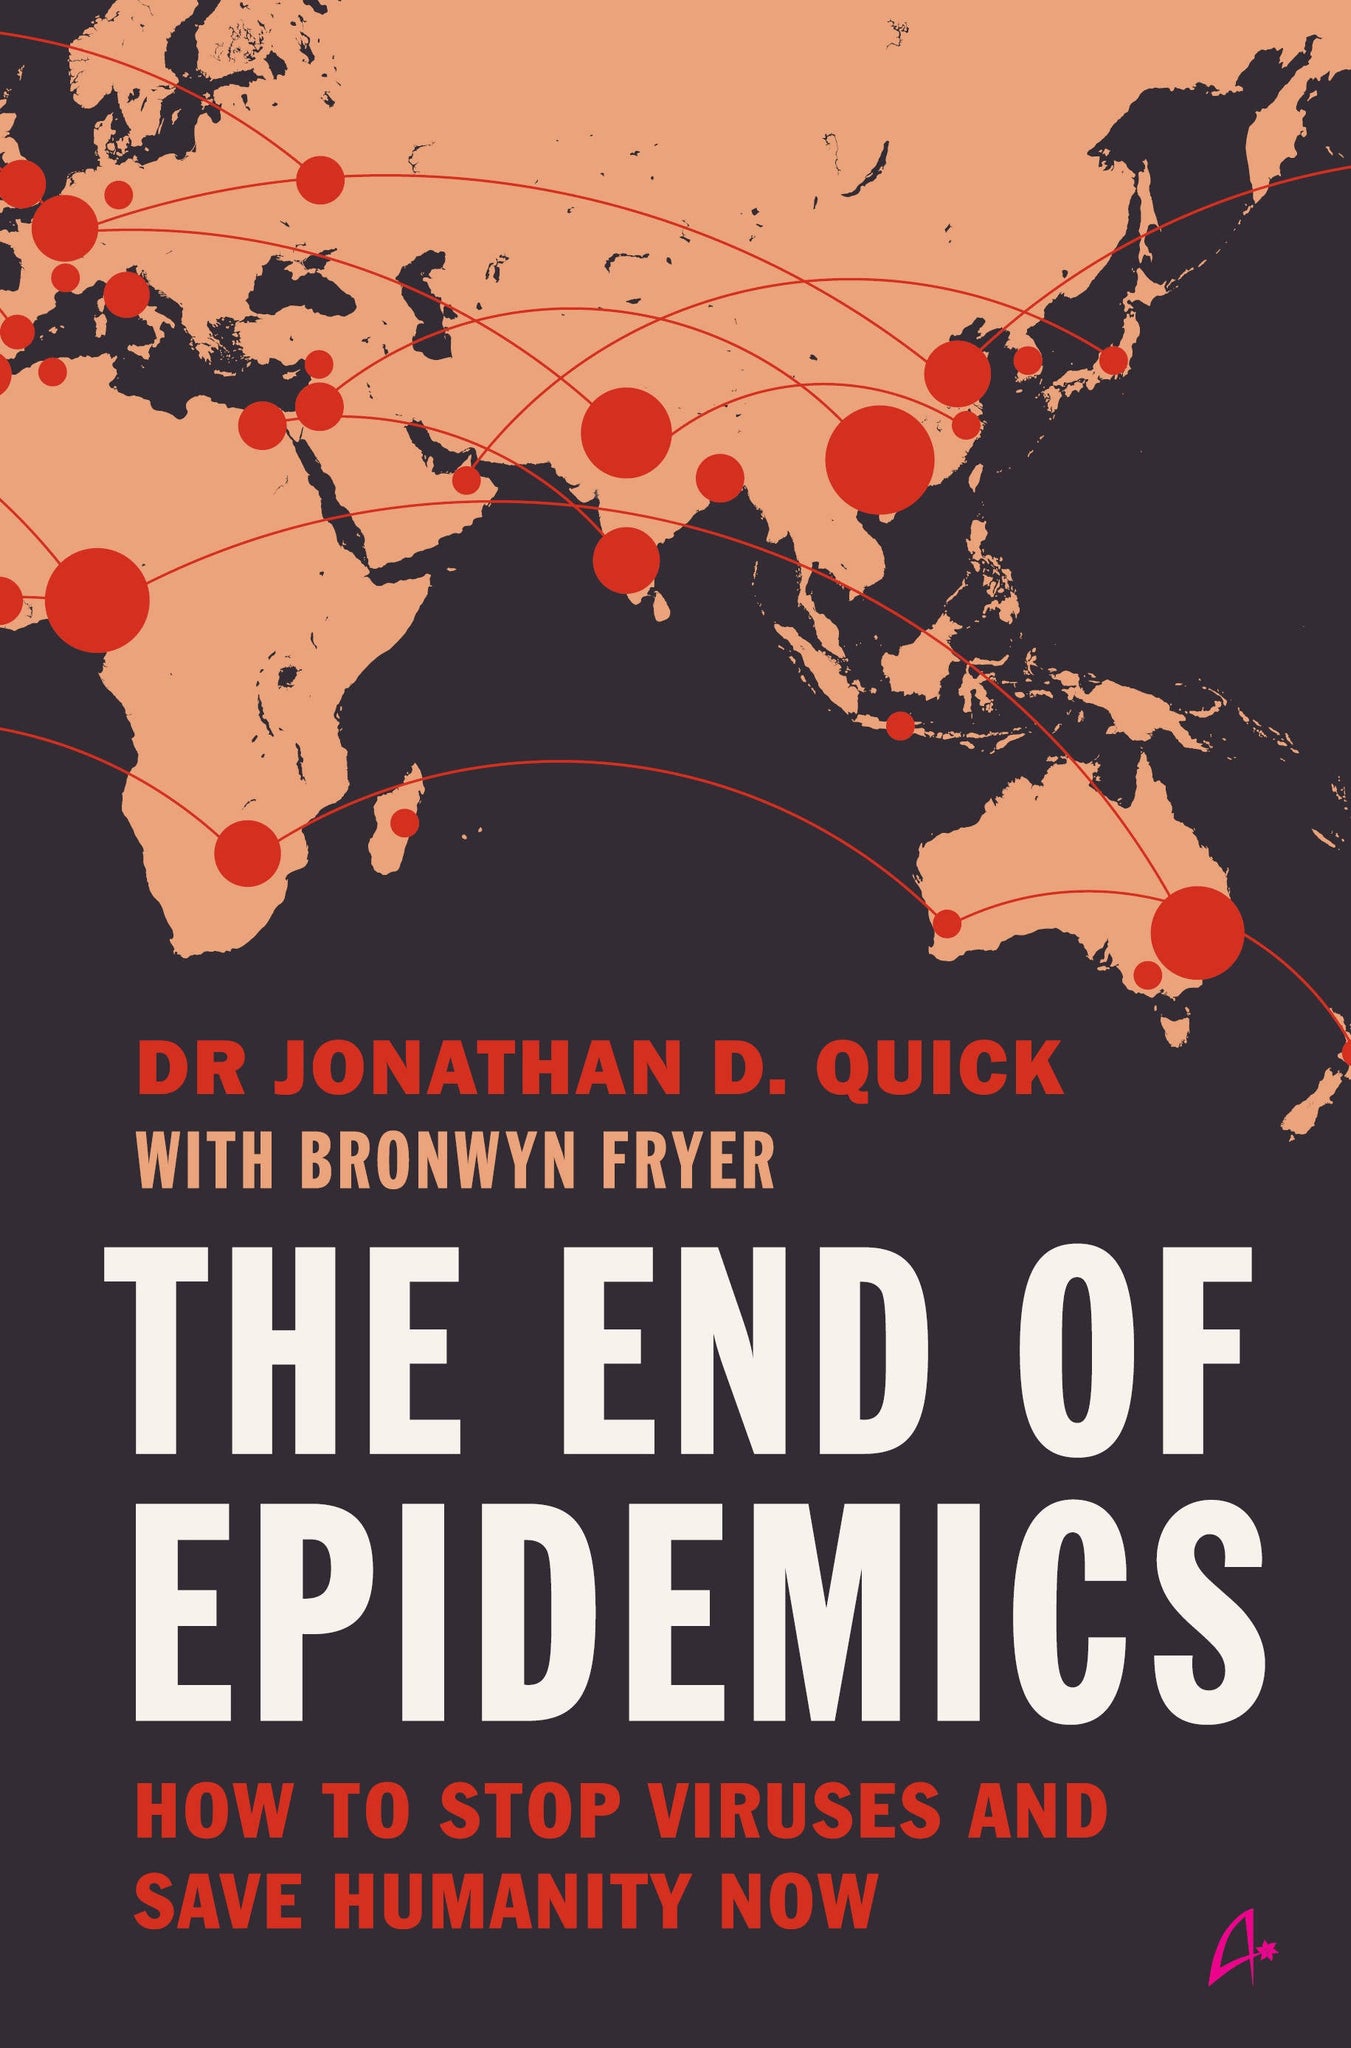 The End of Epidemics: How to Stop Viruses and Save Humanity 2020